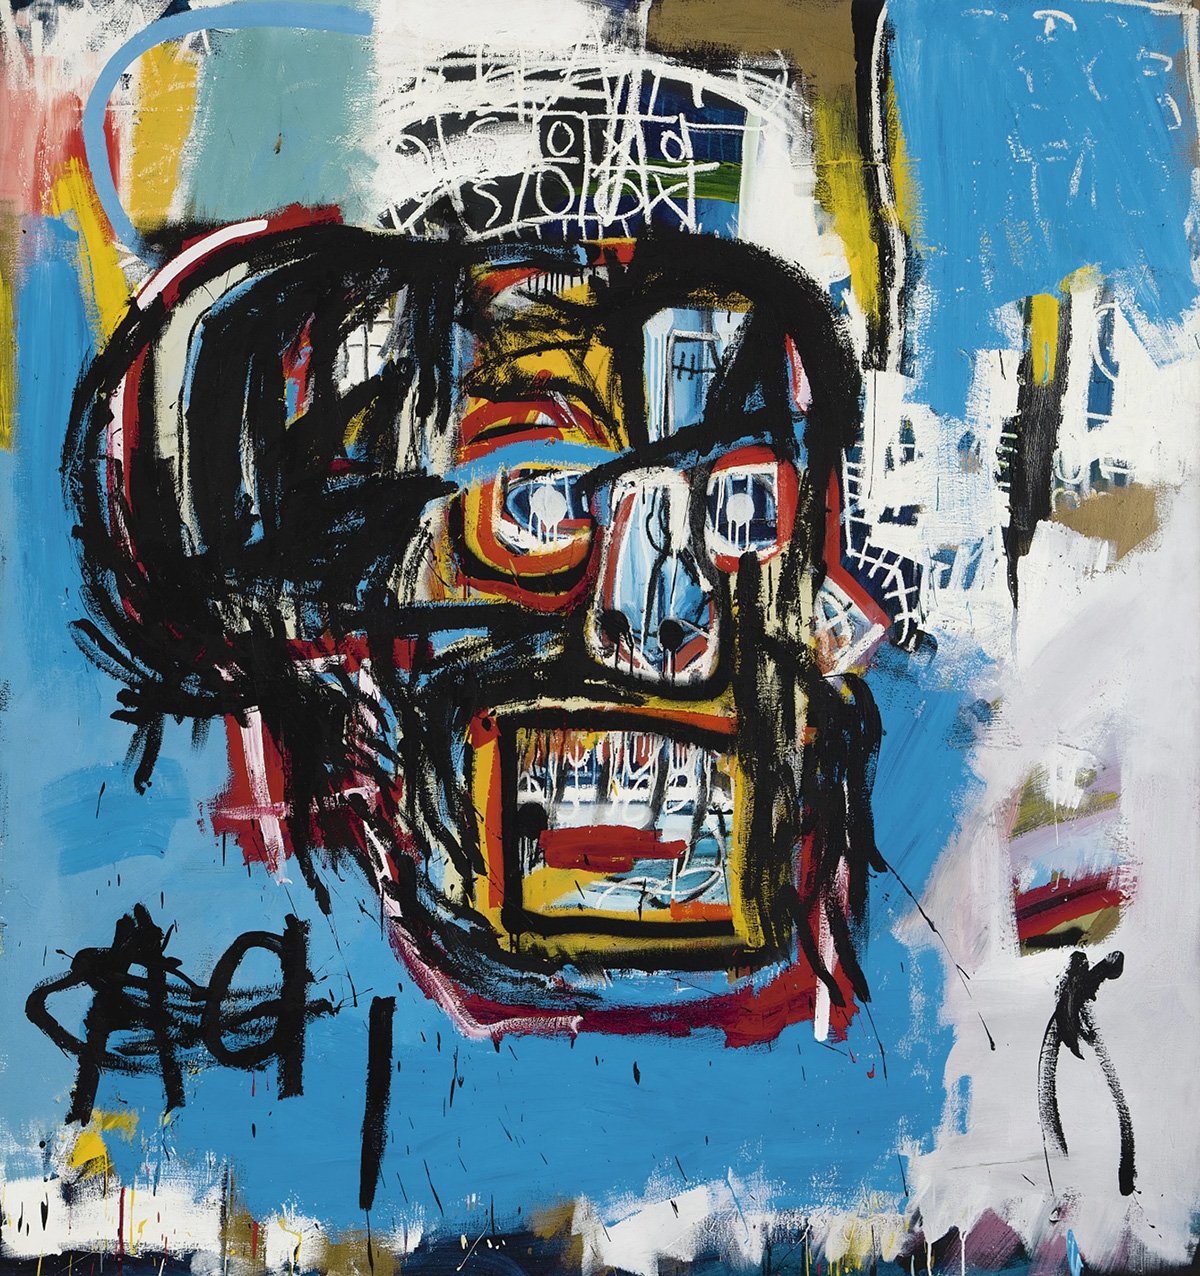 The painting features a dominant central skull shape in vibrant and bold colors. It encapsulates the raw emotion and powerful symbolism synonymous with Basquiat's revolutionary style.